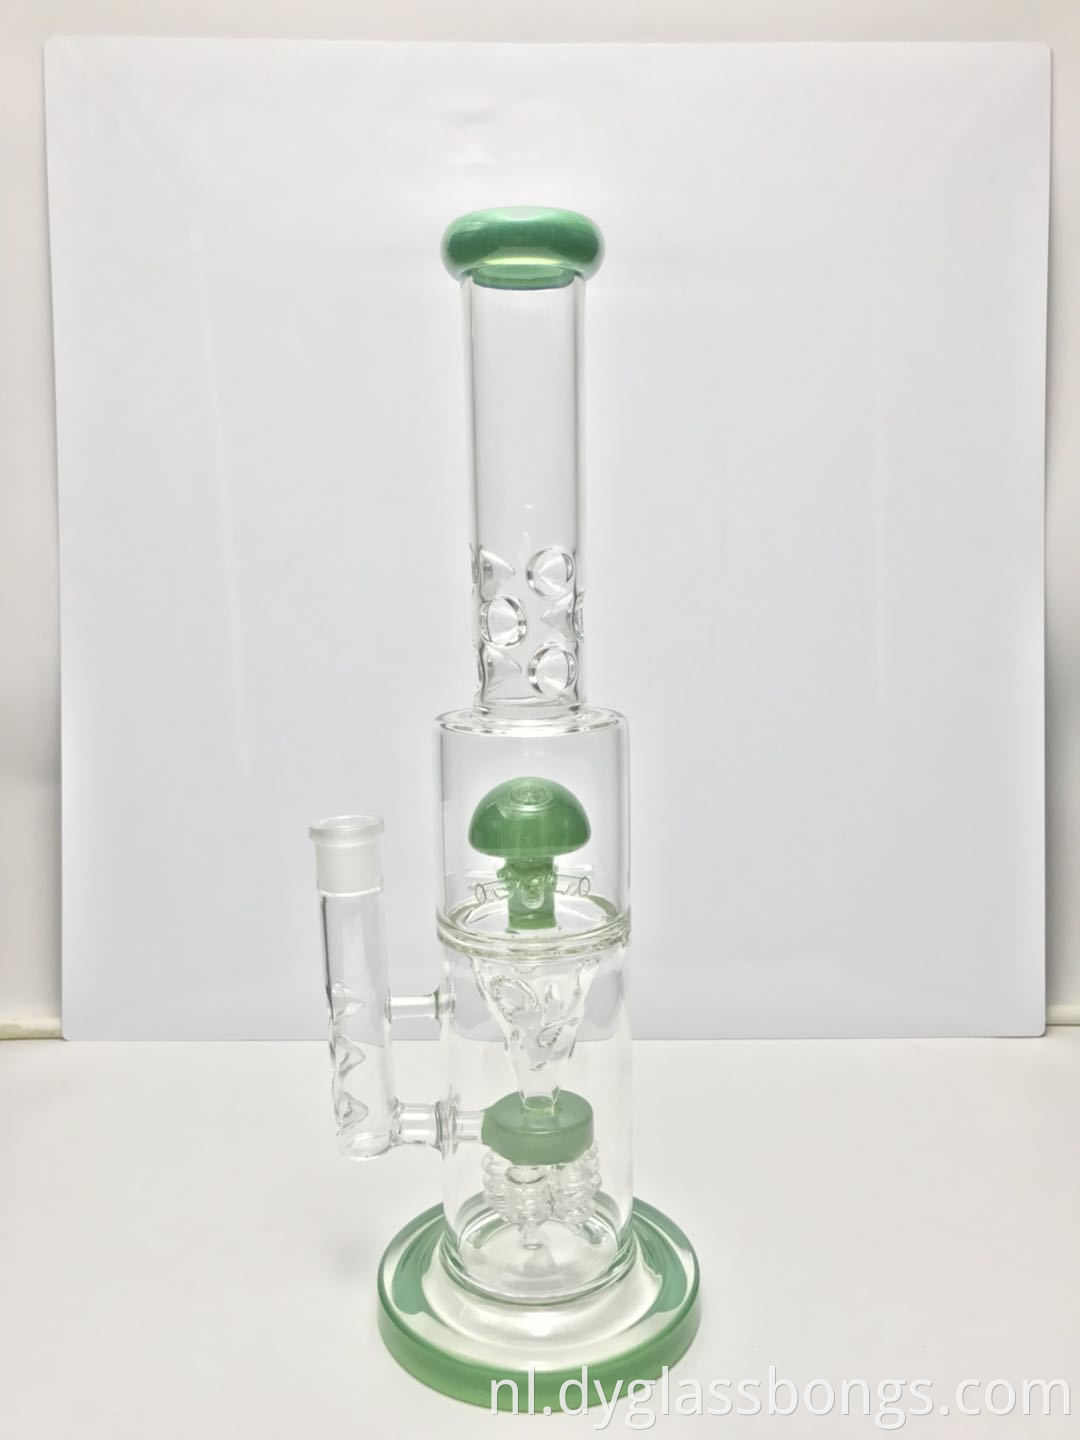 16 inch two bubbler hookahs with 18mm bowl